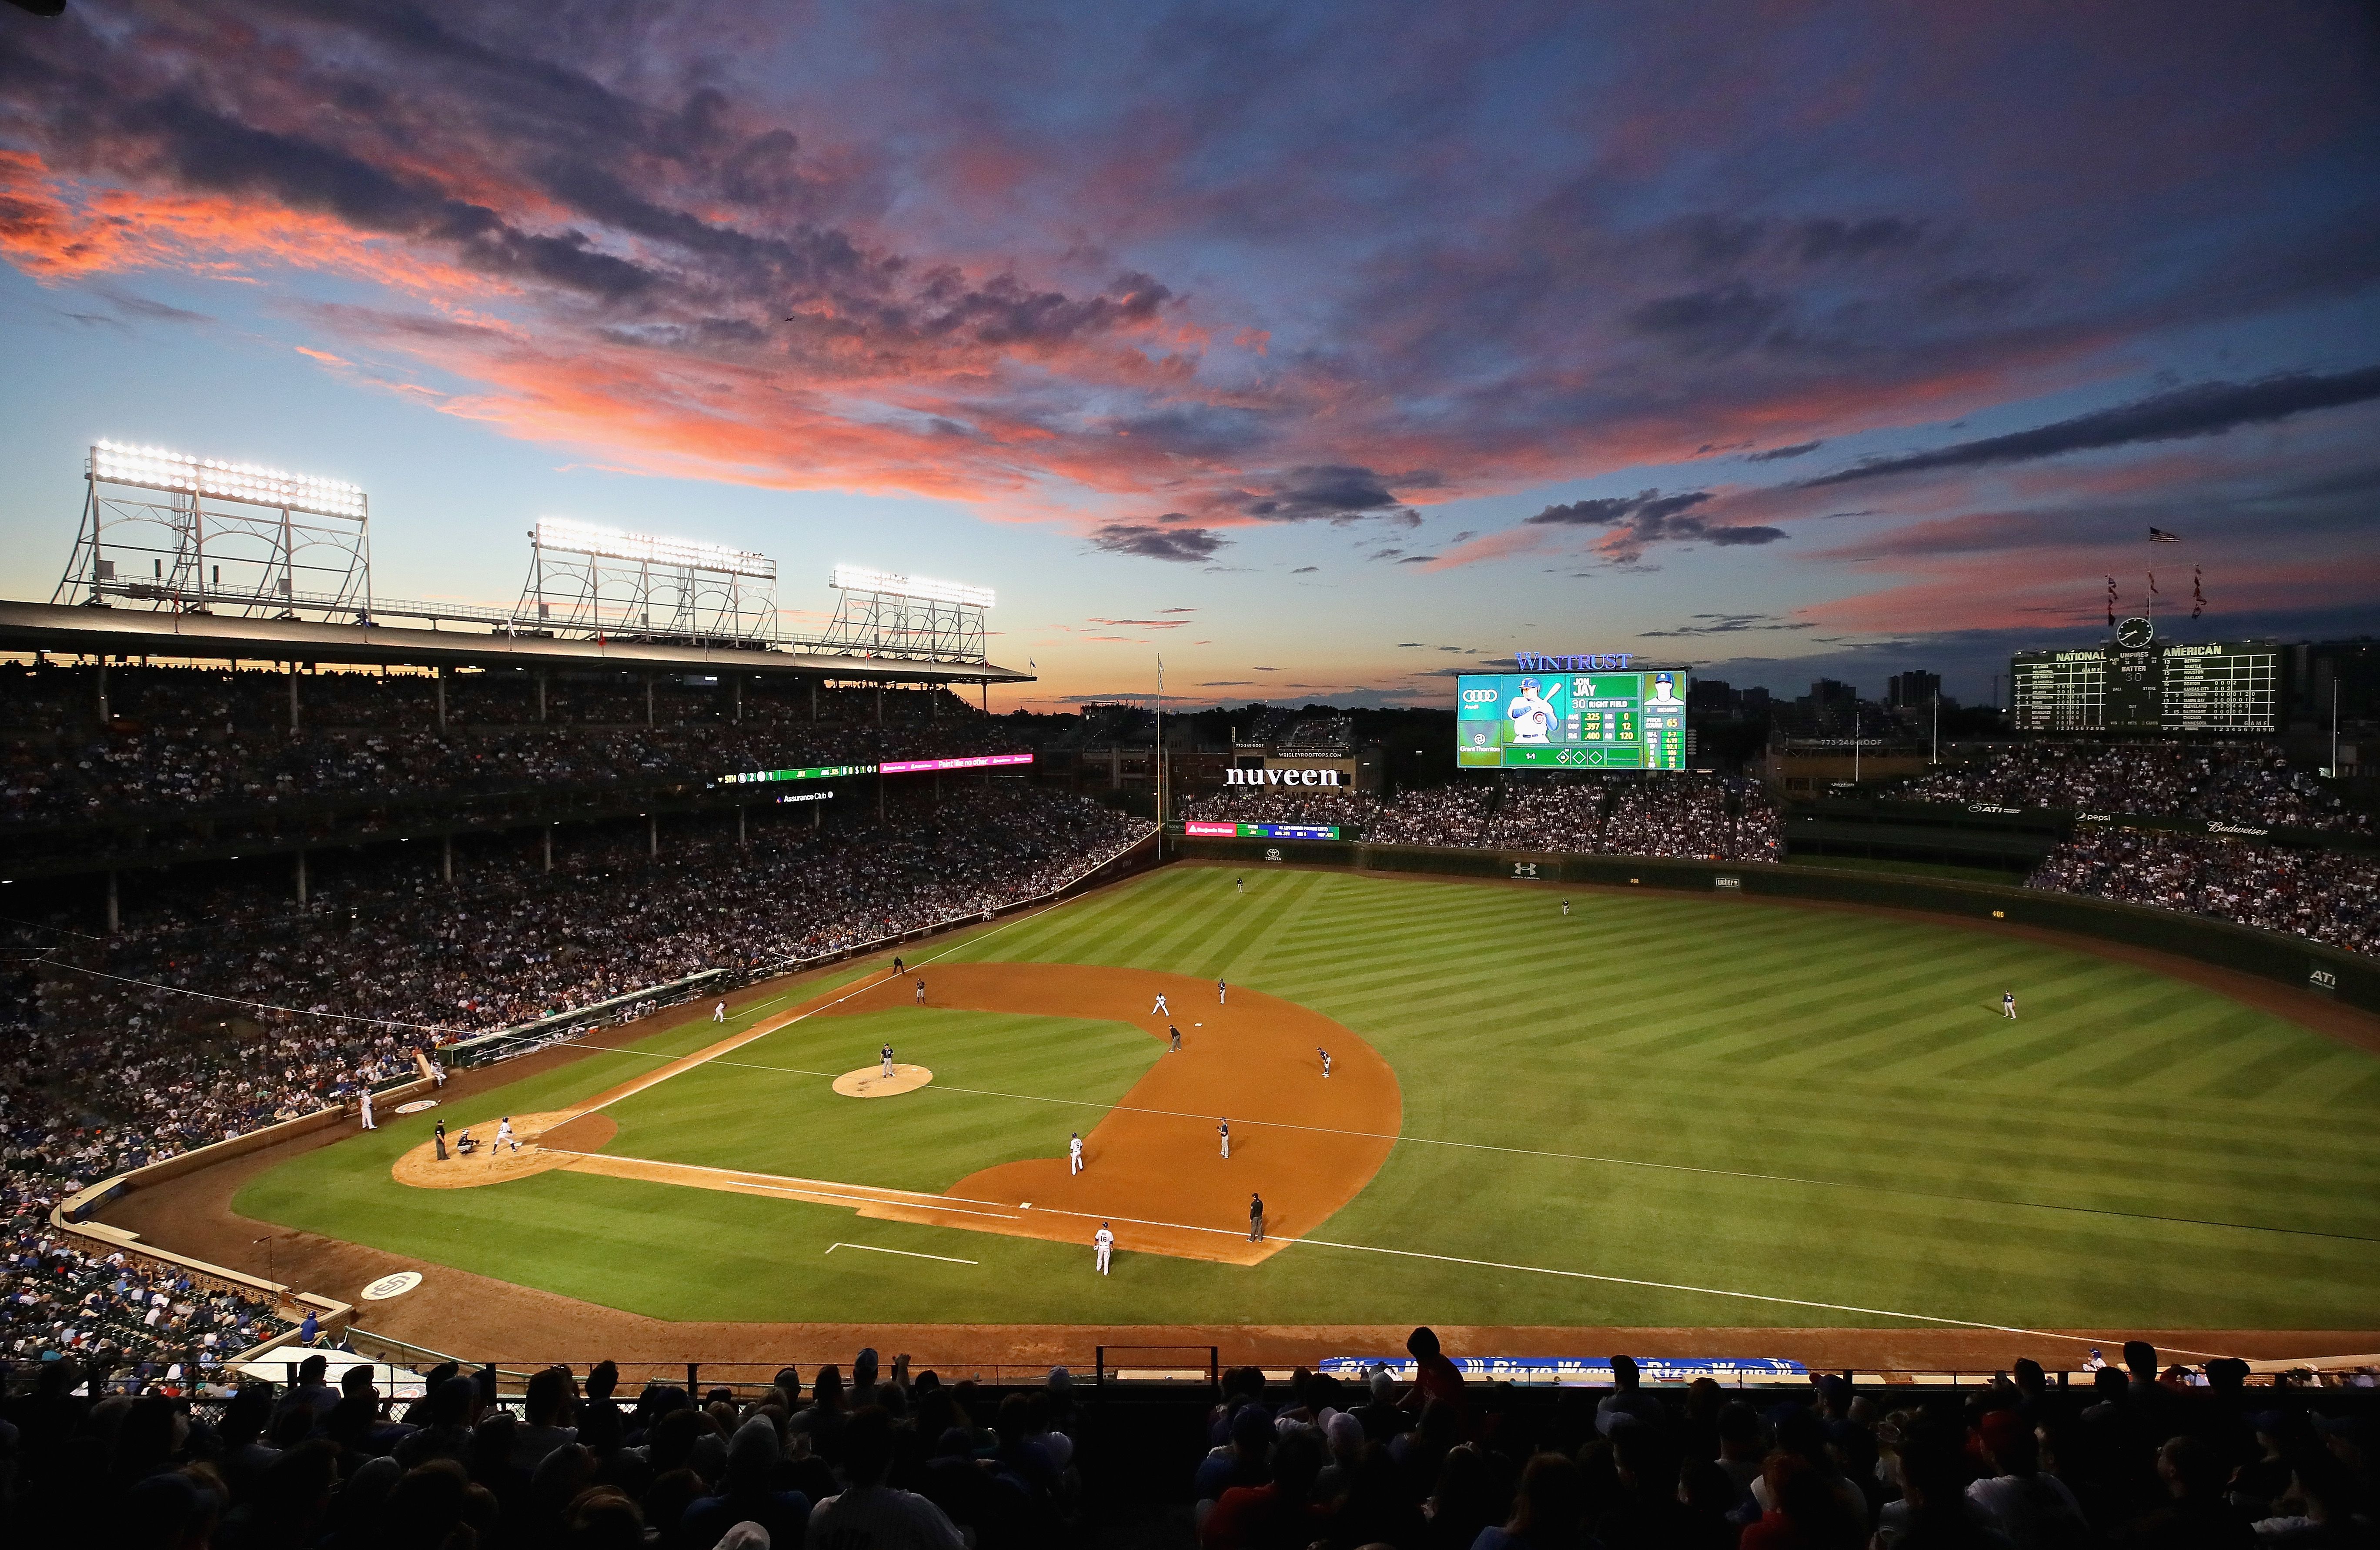 A general view of Wrigley Field at sunset.